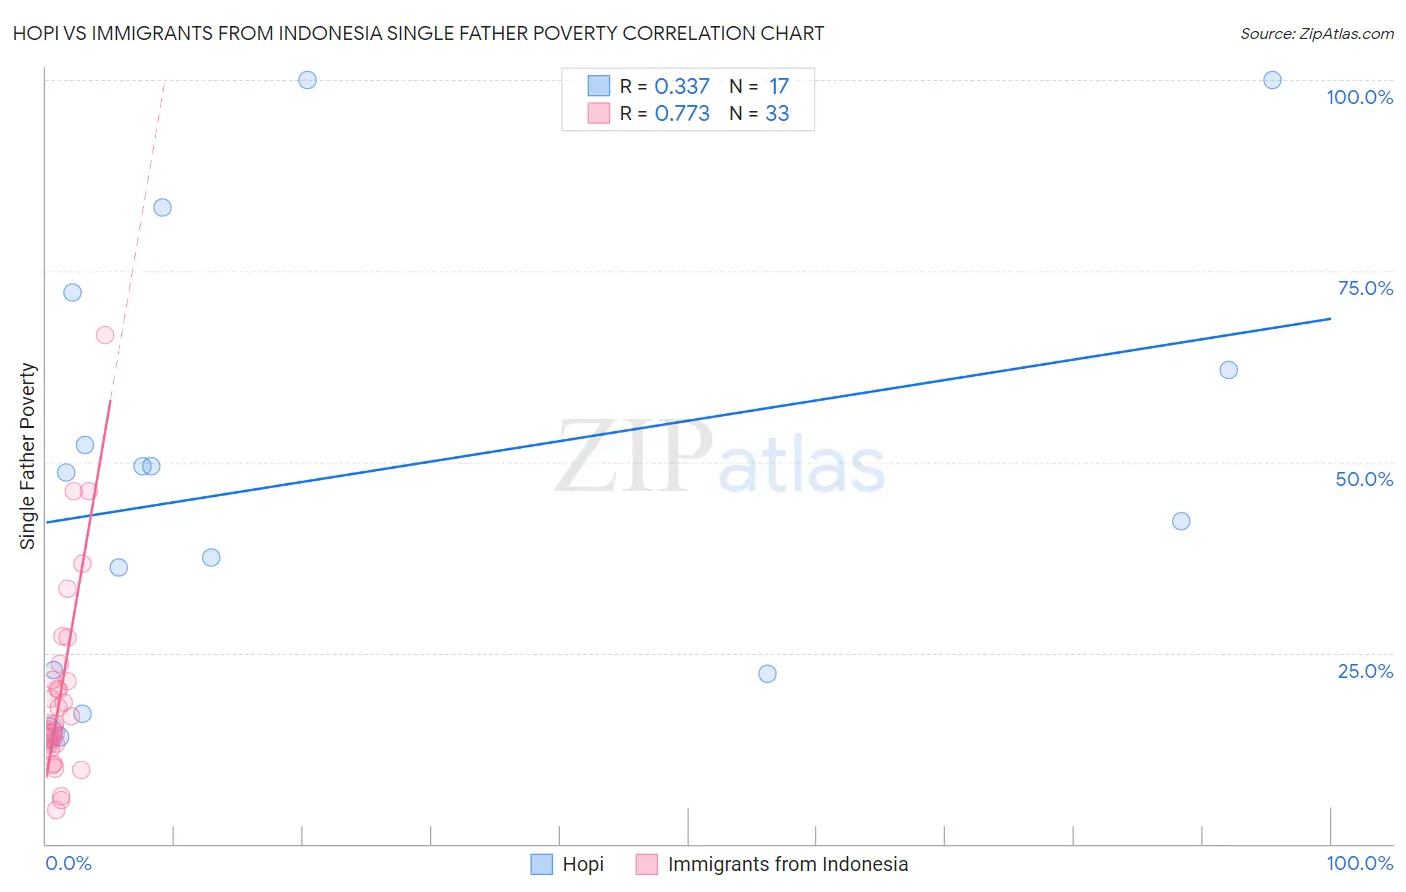 Hopi vs Immigrants from Indonesia Single Father Poverty